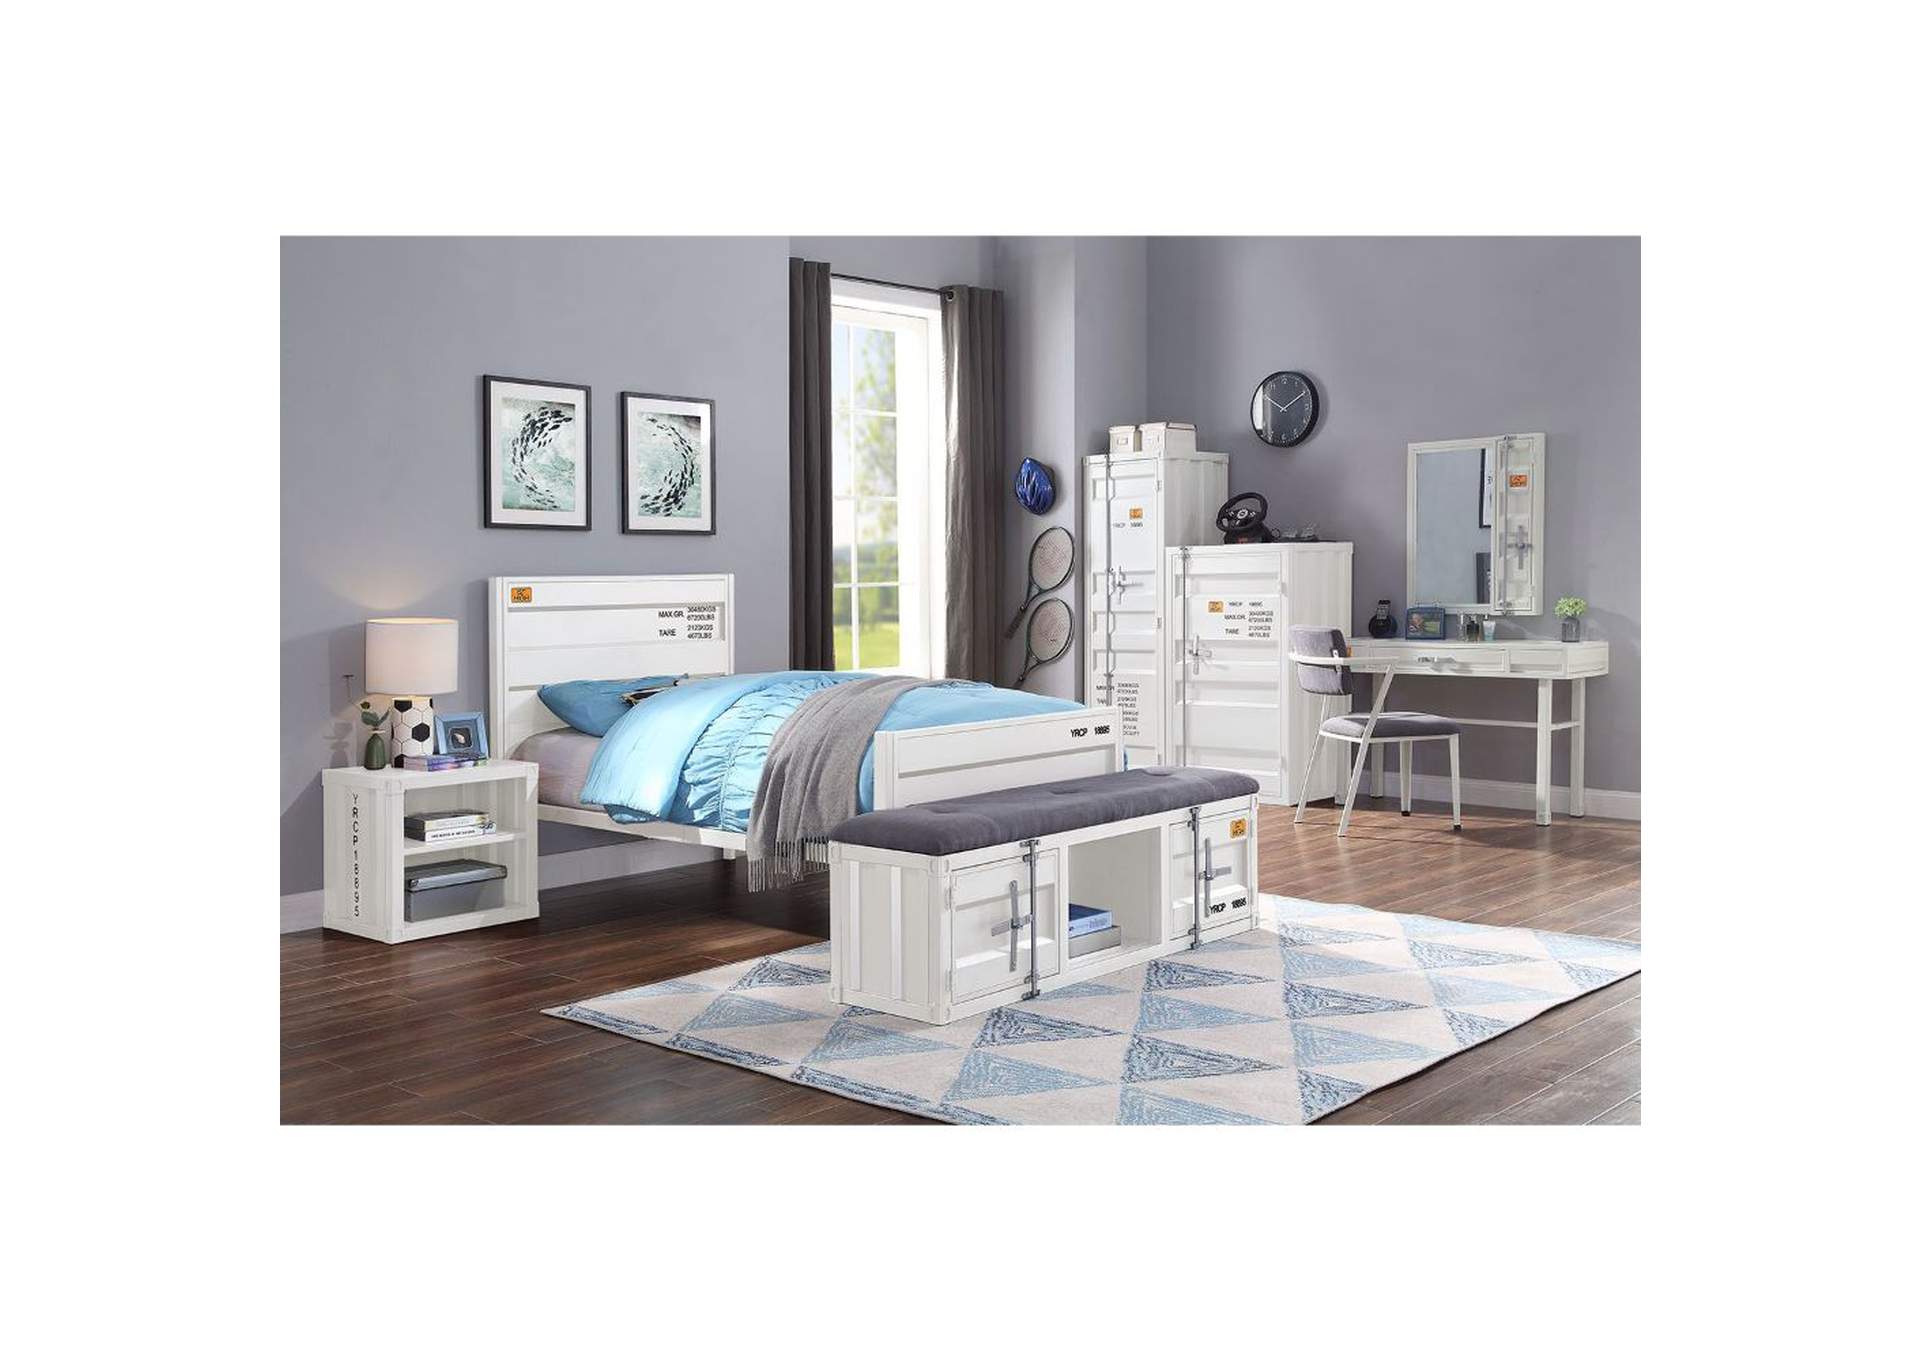 White Cargo Twin Bed Best Furniture, Cargo Twin Bed Trundle